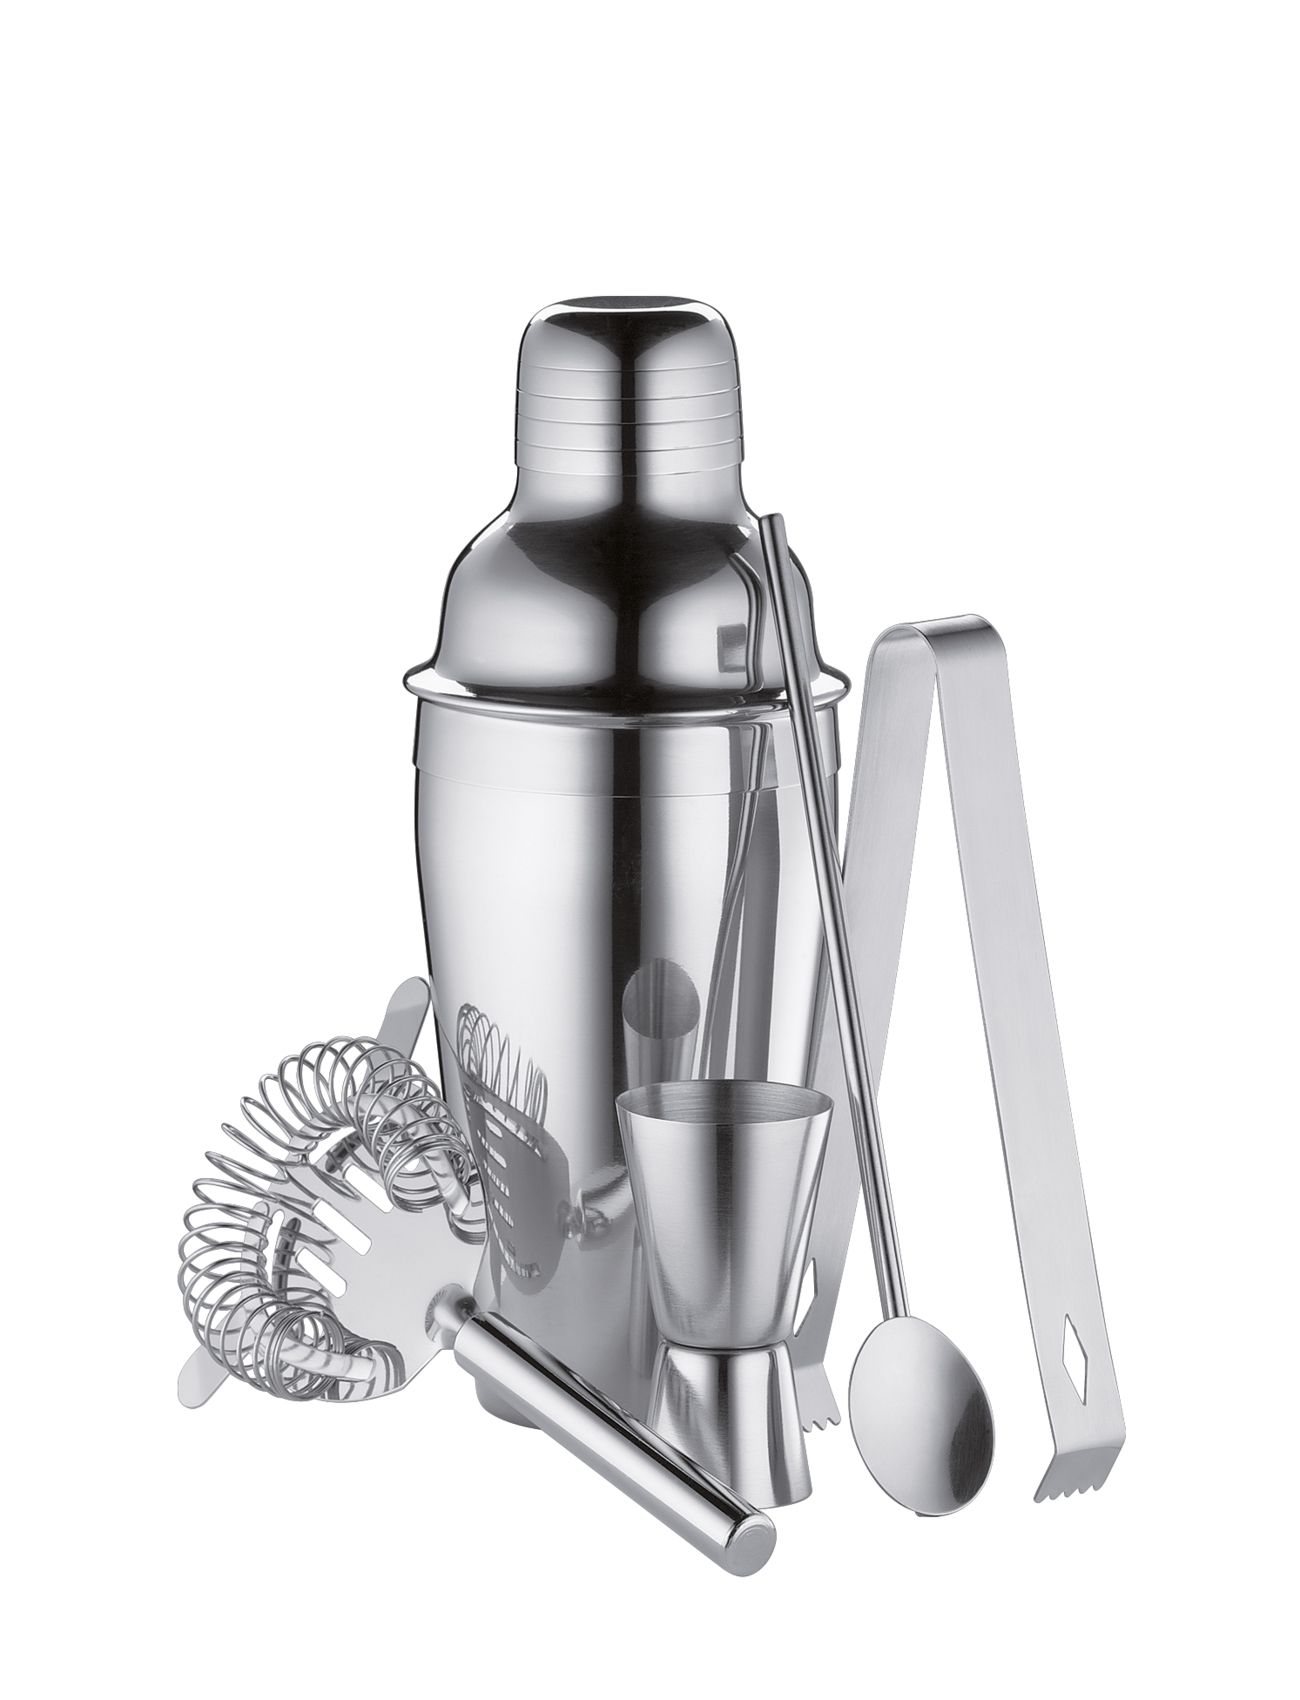 Barsæt I Rustfrit Stål, 5 Dele Home Tableware Drink & Bar Accessories Shakers & Cocktail Utensils Silver Cilio